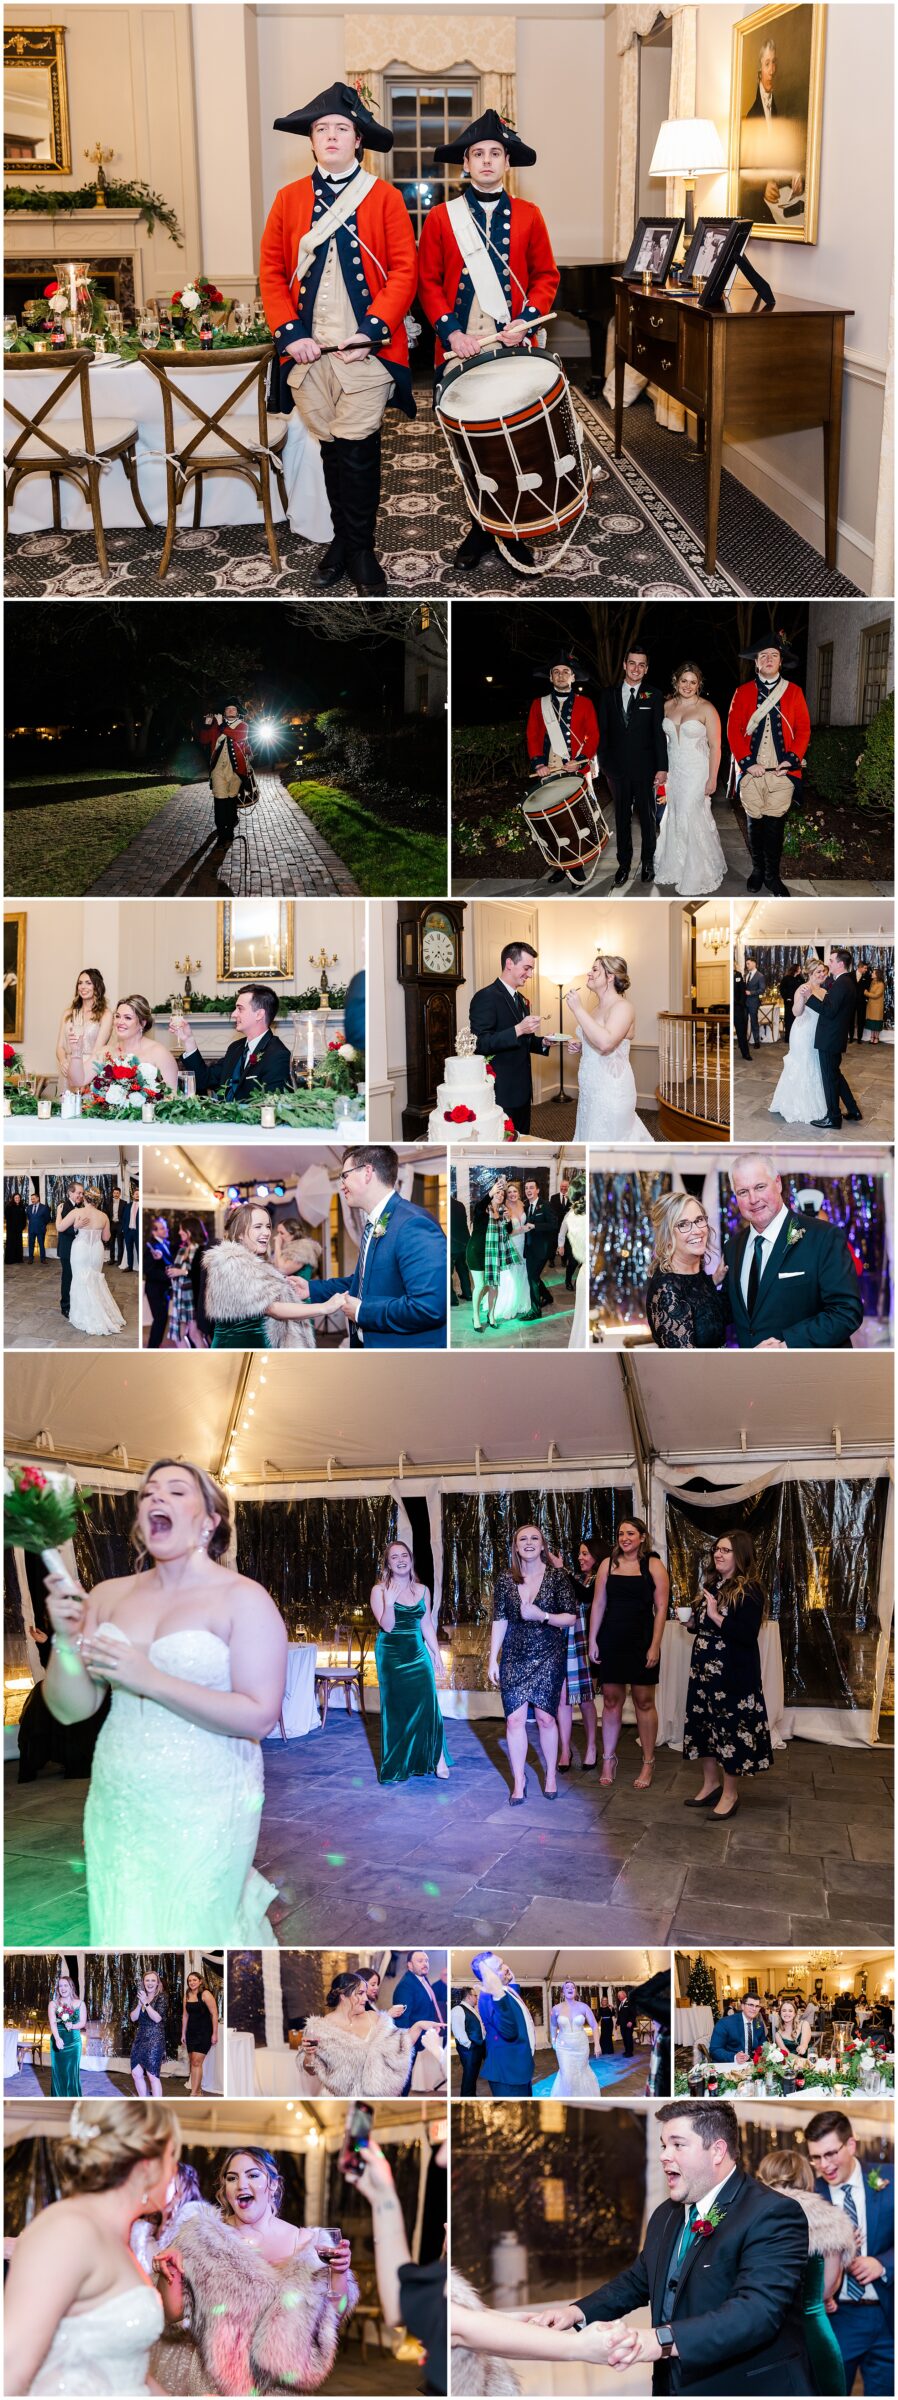 Reception collage with fifes and drum and friends dancing at Christmas wedding at Williamsburg Inn